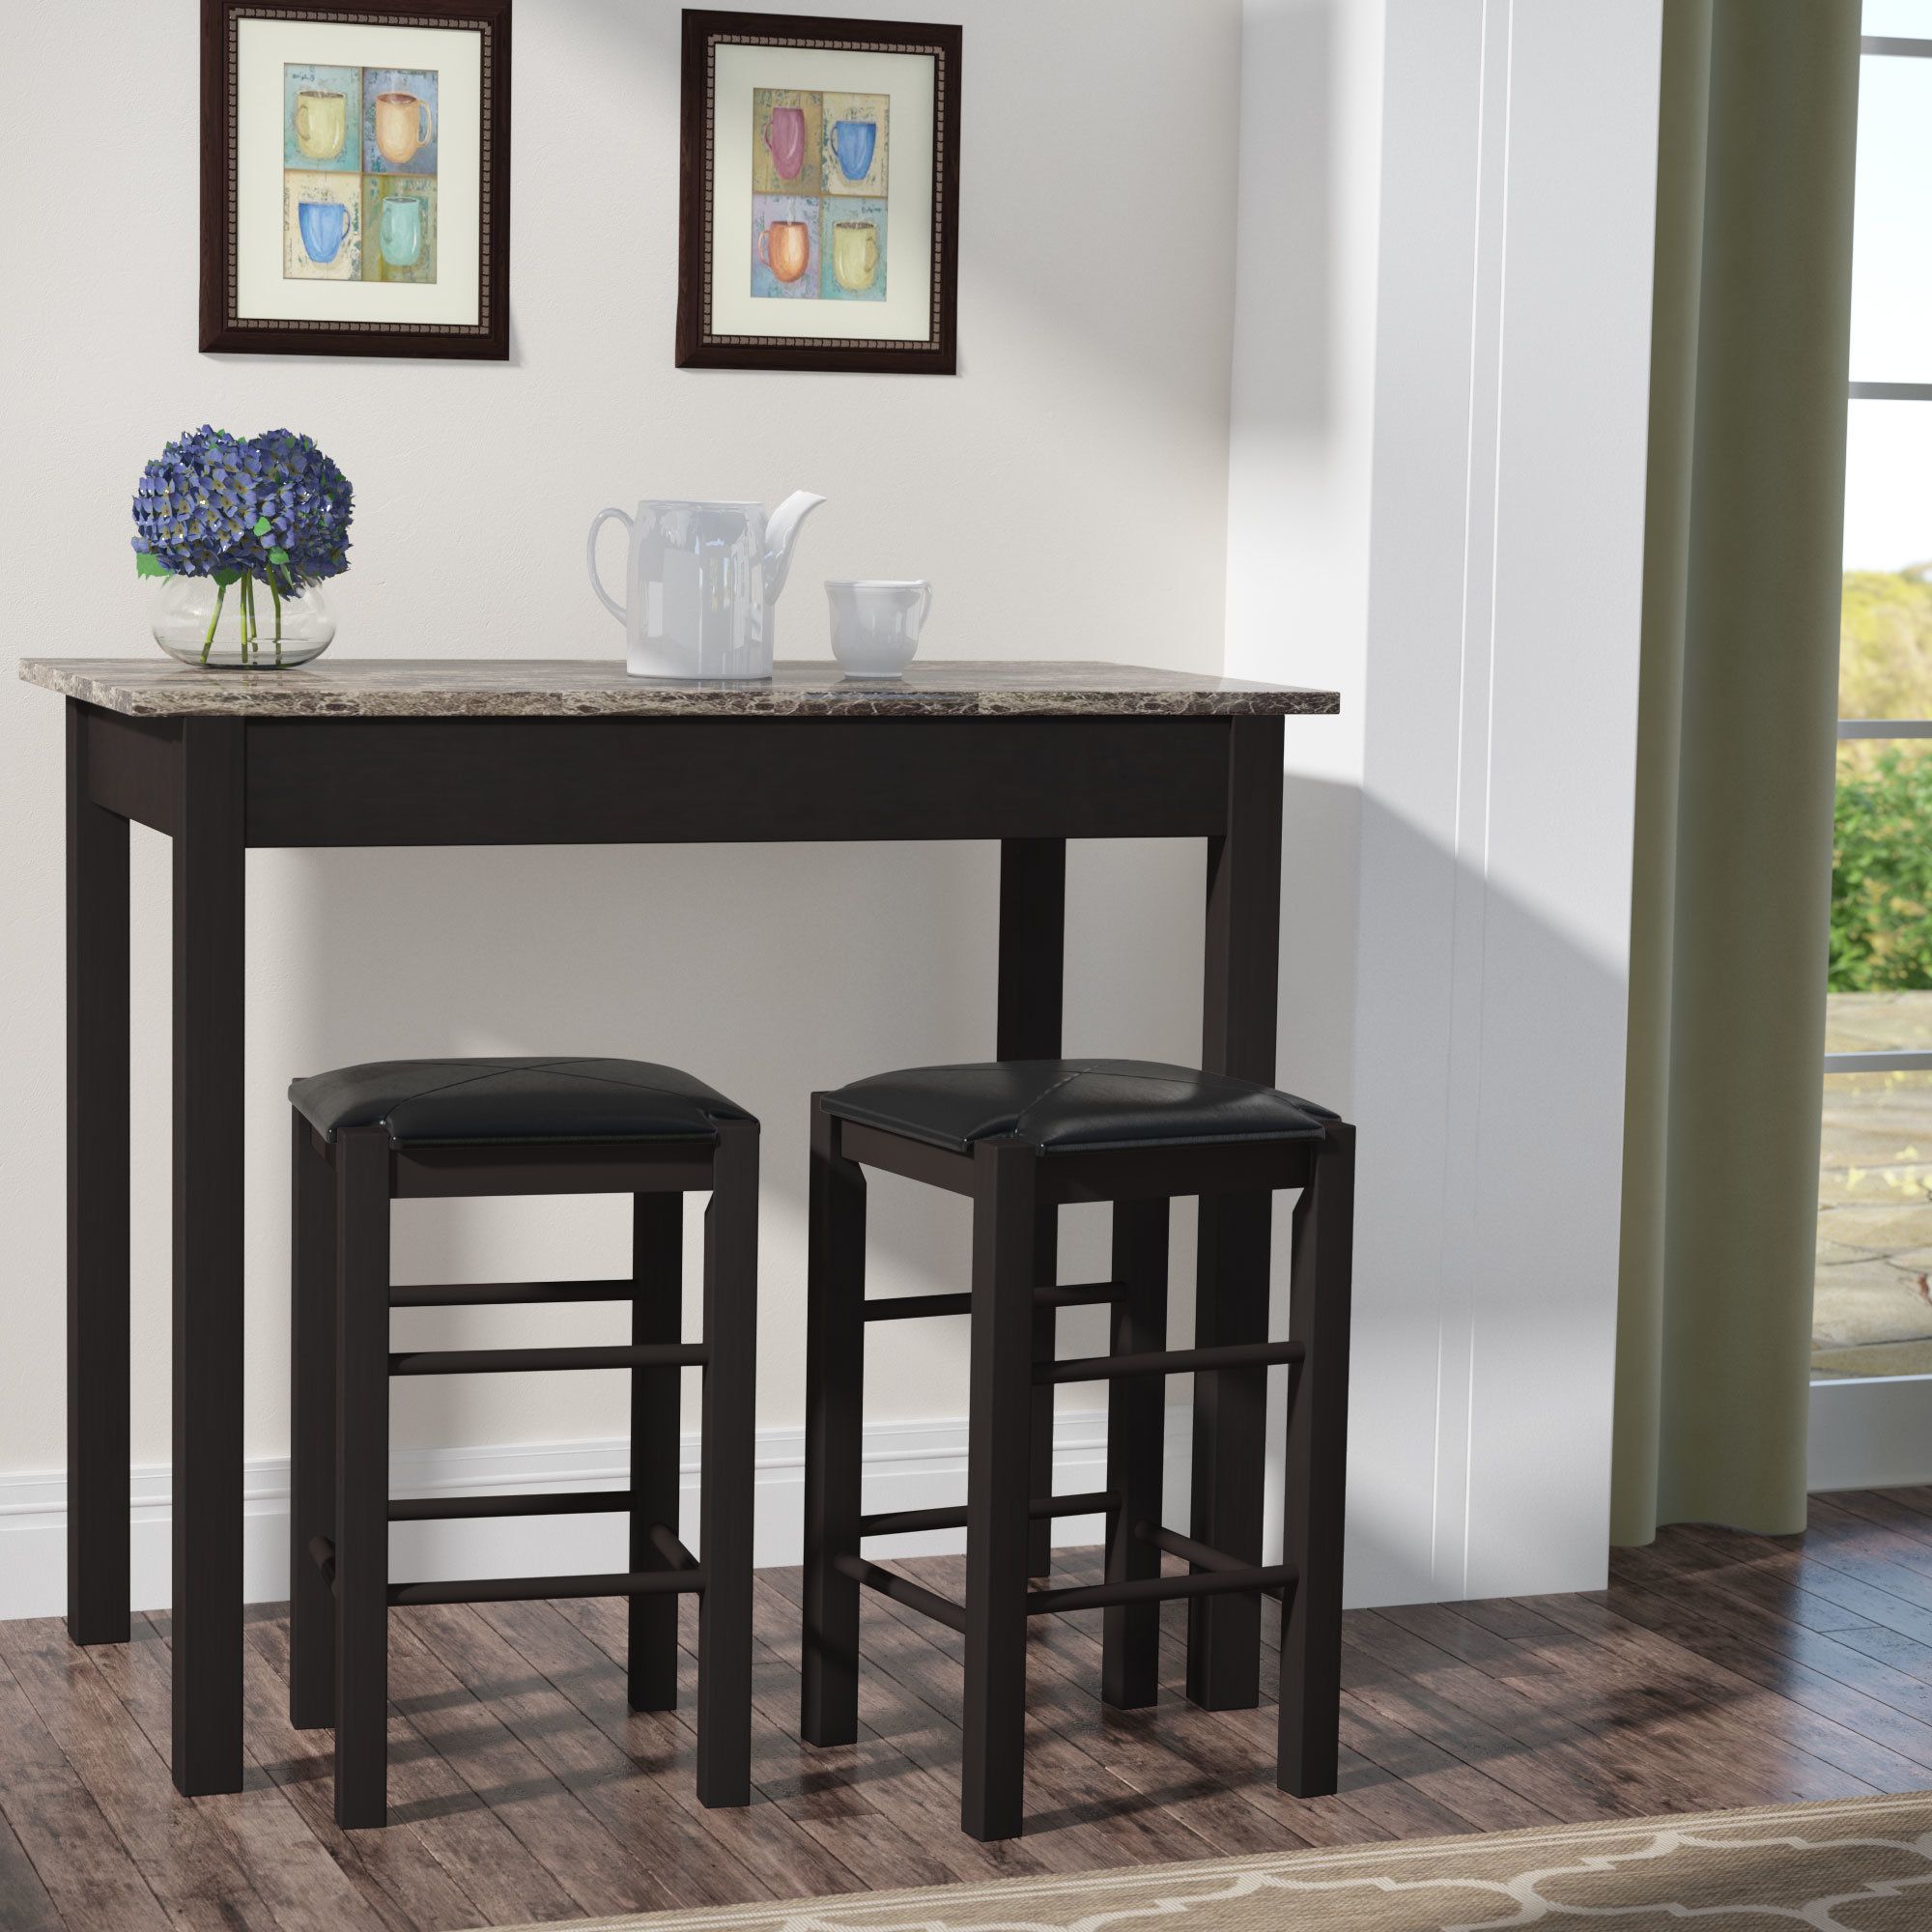 Sheetz 3 Piece Counter Height Dining Set Within Most Recently Released Bettencourt 3 Piece Counter Height Dining Sets (View 12 of 20)